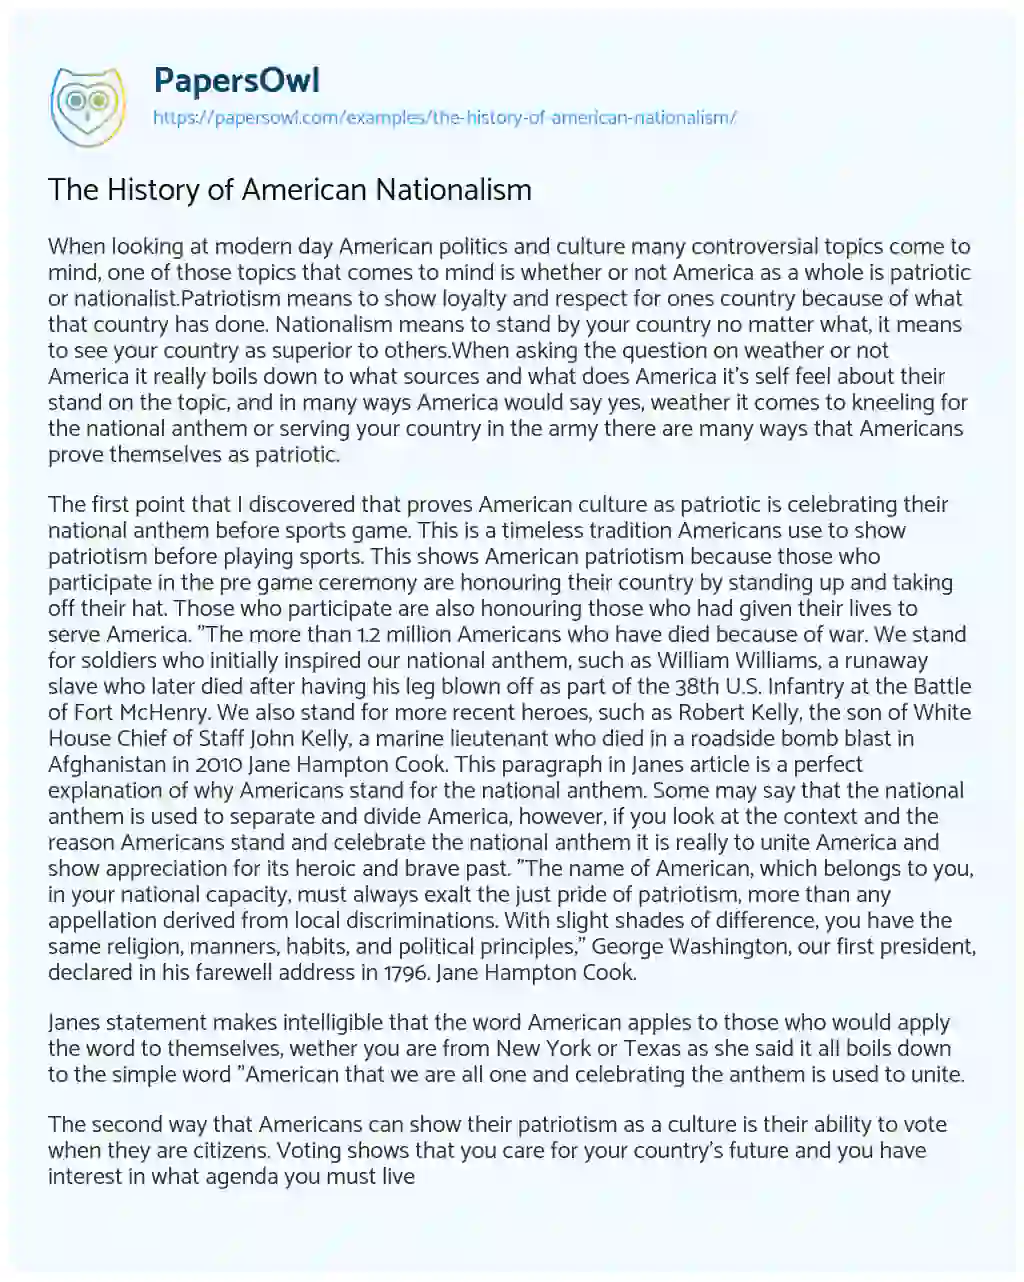 Essay on The History of American Nationalism